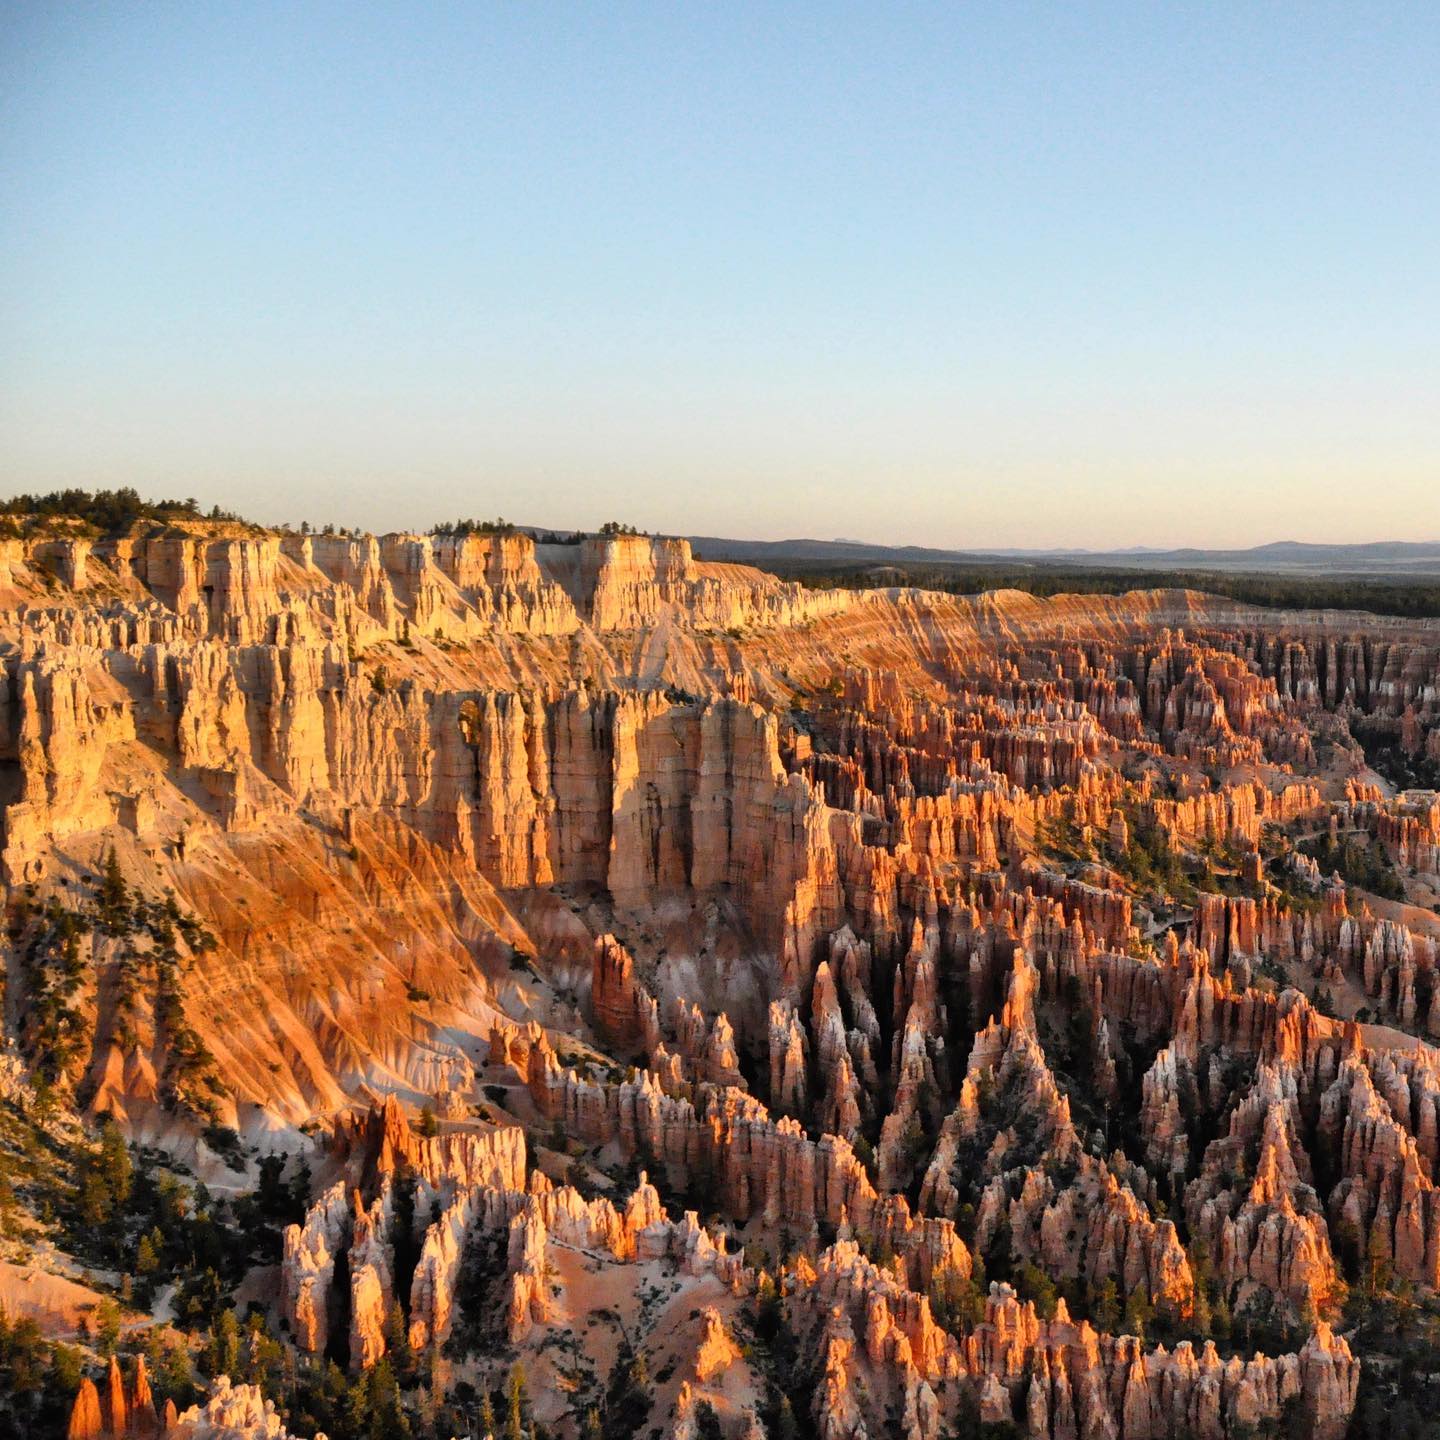 Sunrise Point, Bryce Canyon NP, Utah

Get up early and head to Sunrise Point, which is located about 2 miles from the visitor center.
The view on the amphitheater is just magnificent. This spot is by far the most popular in the NP.
Afterwards you can hike the Queens Garden Trail. Queens Garden Trail starts at Sunrise Point. It's a easy hike down into the valley. Or you combine the Queens Garden and Navajo Loop. 
#usa #usatravel #usatrip #roadtripusa #roadtrippin #usaandgo #us #brycecanyonnationalpark #brycecanyon #utah #utahnationalparks #nationalparksusa #hiking #sunrise #reisefotografie #travelphotography #travelgram #nature #naturelovers #naturephotography #natur #naturfotografie #beautifuldestinations #beautifulnature #travelblog #travelblogger #reiseblog #reiseblogger #instatravel